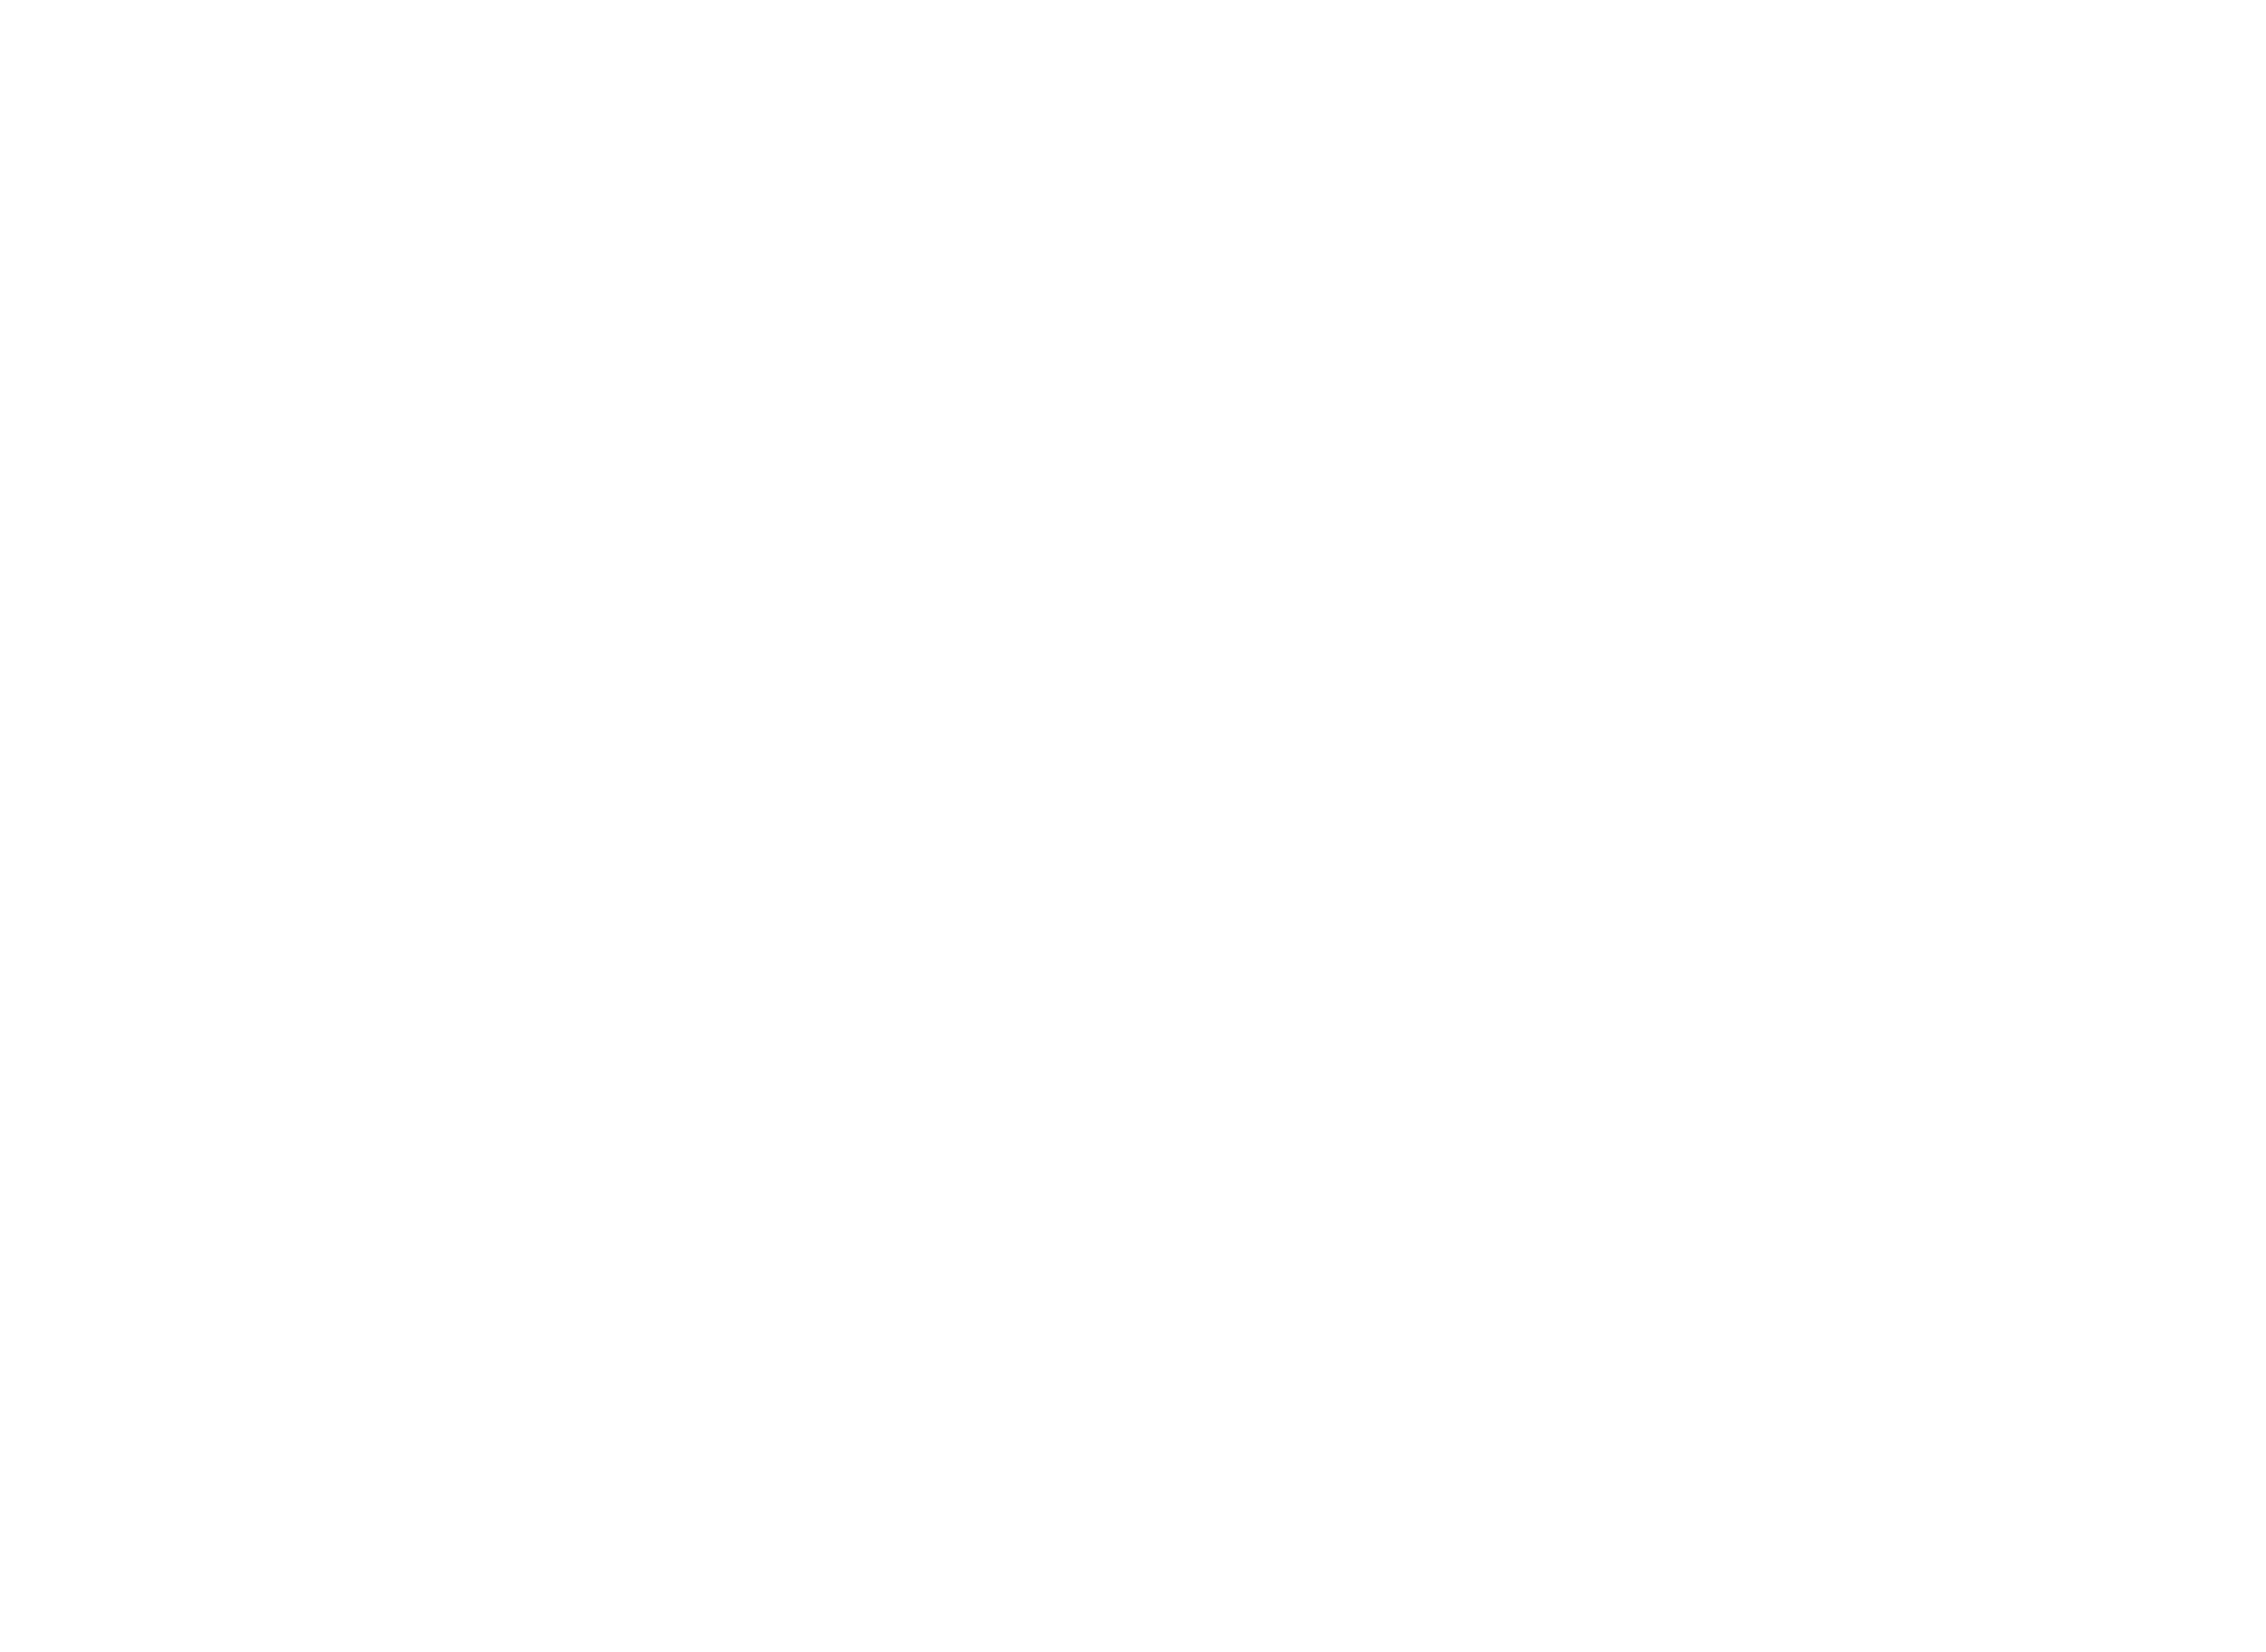 DWNTWN Realty Advisors | Miami Commercial Real Estate Brokerage Firm